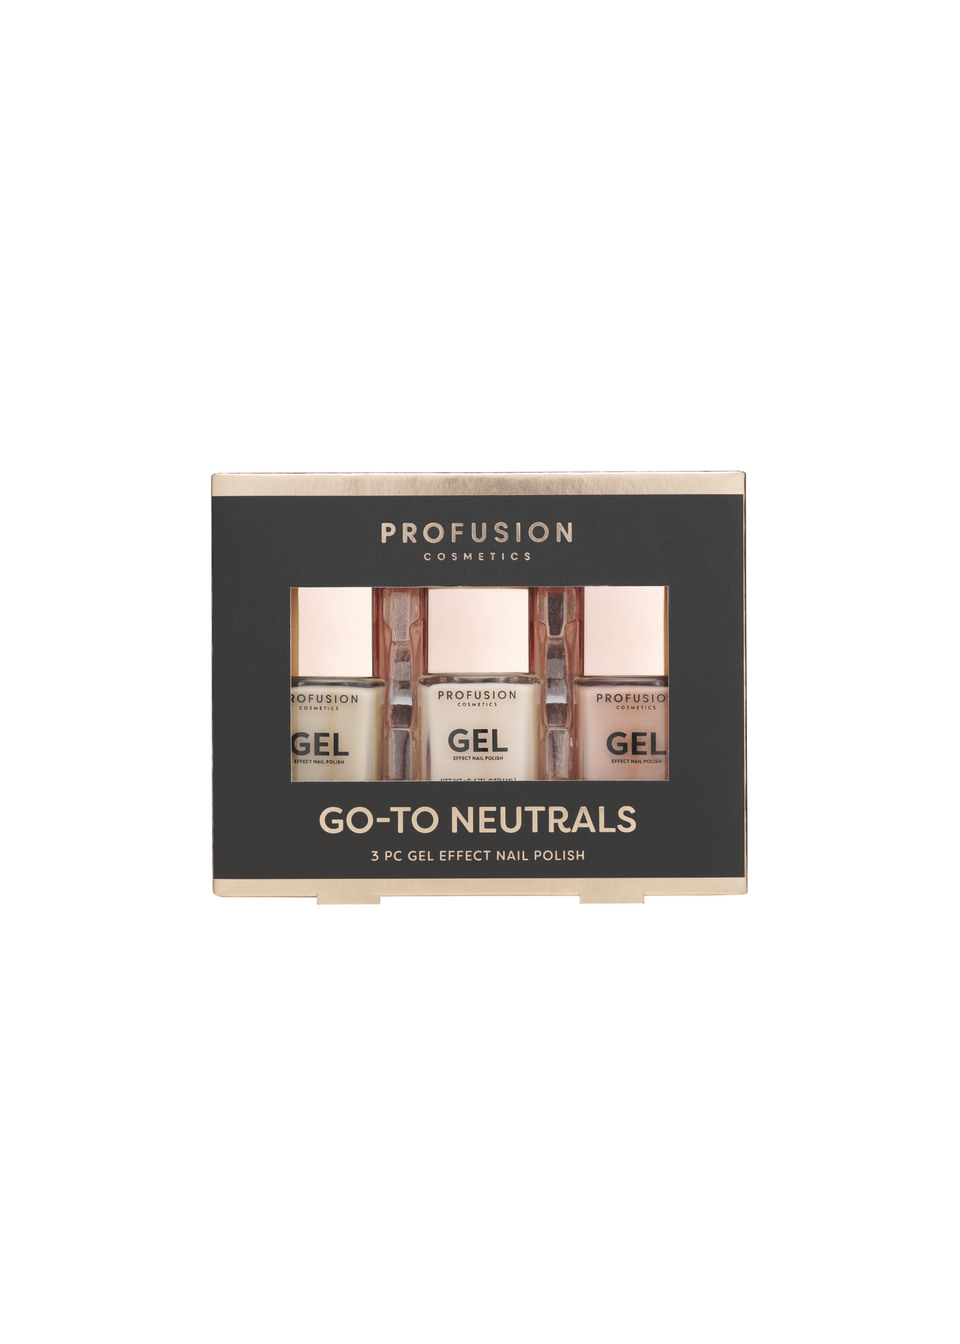 Profusion Cosmetics 3pc Gel Effect Nail Polish Go-to Neutrals